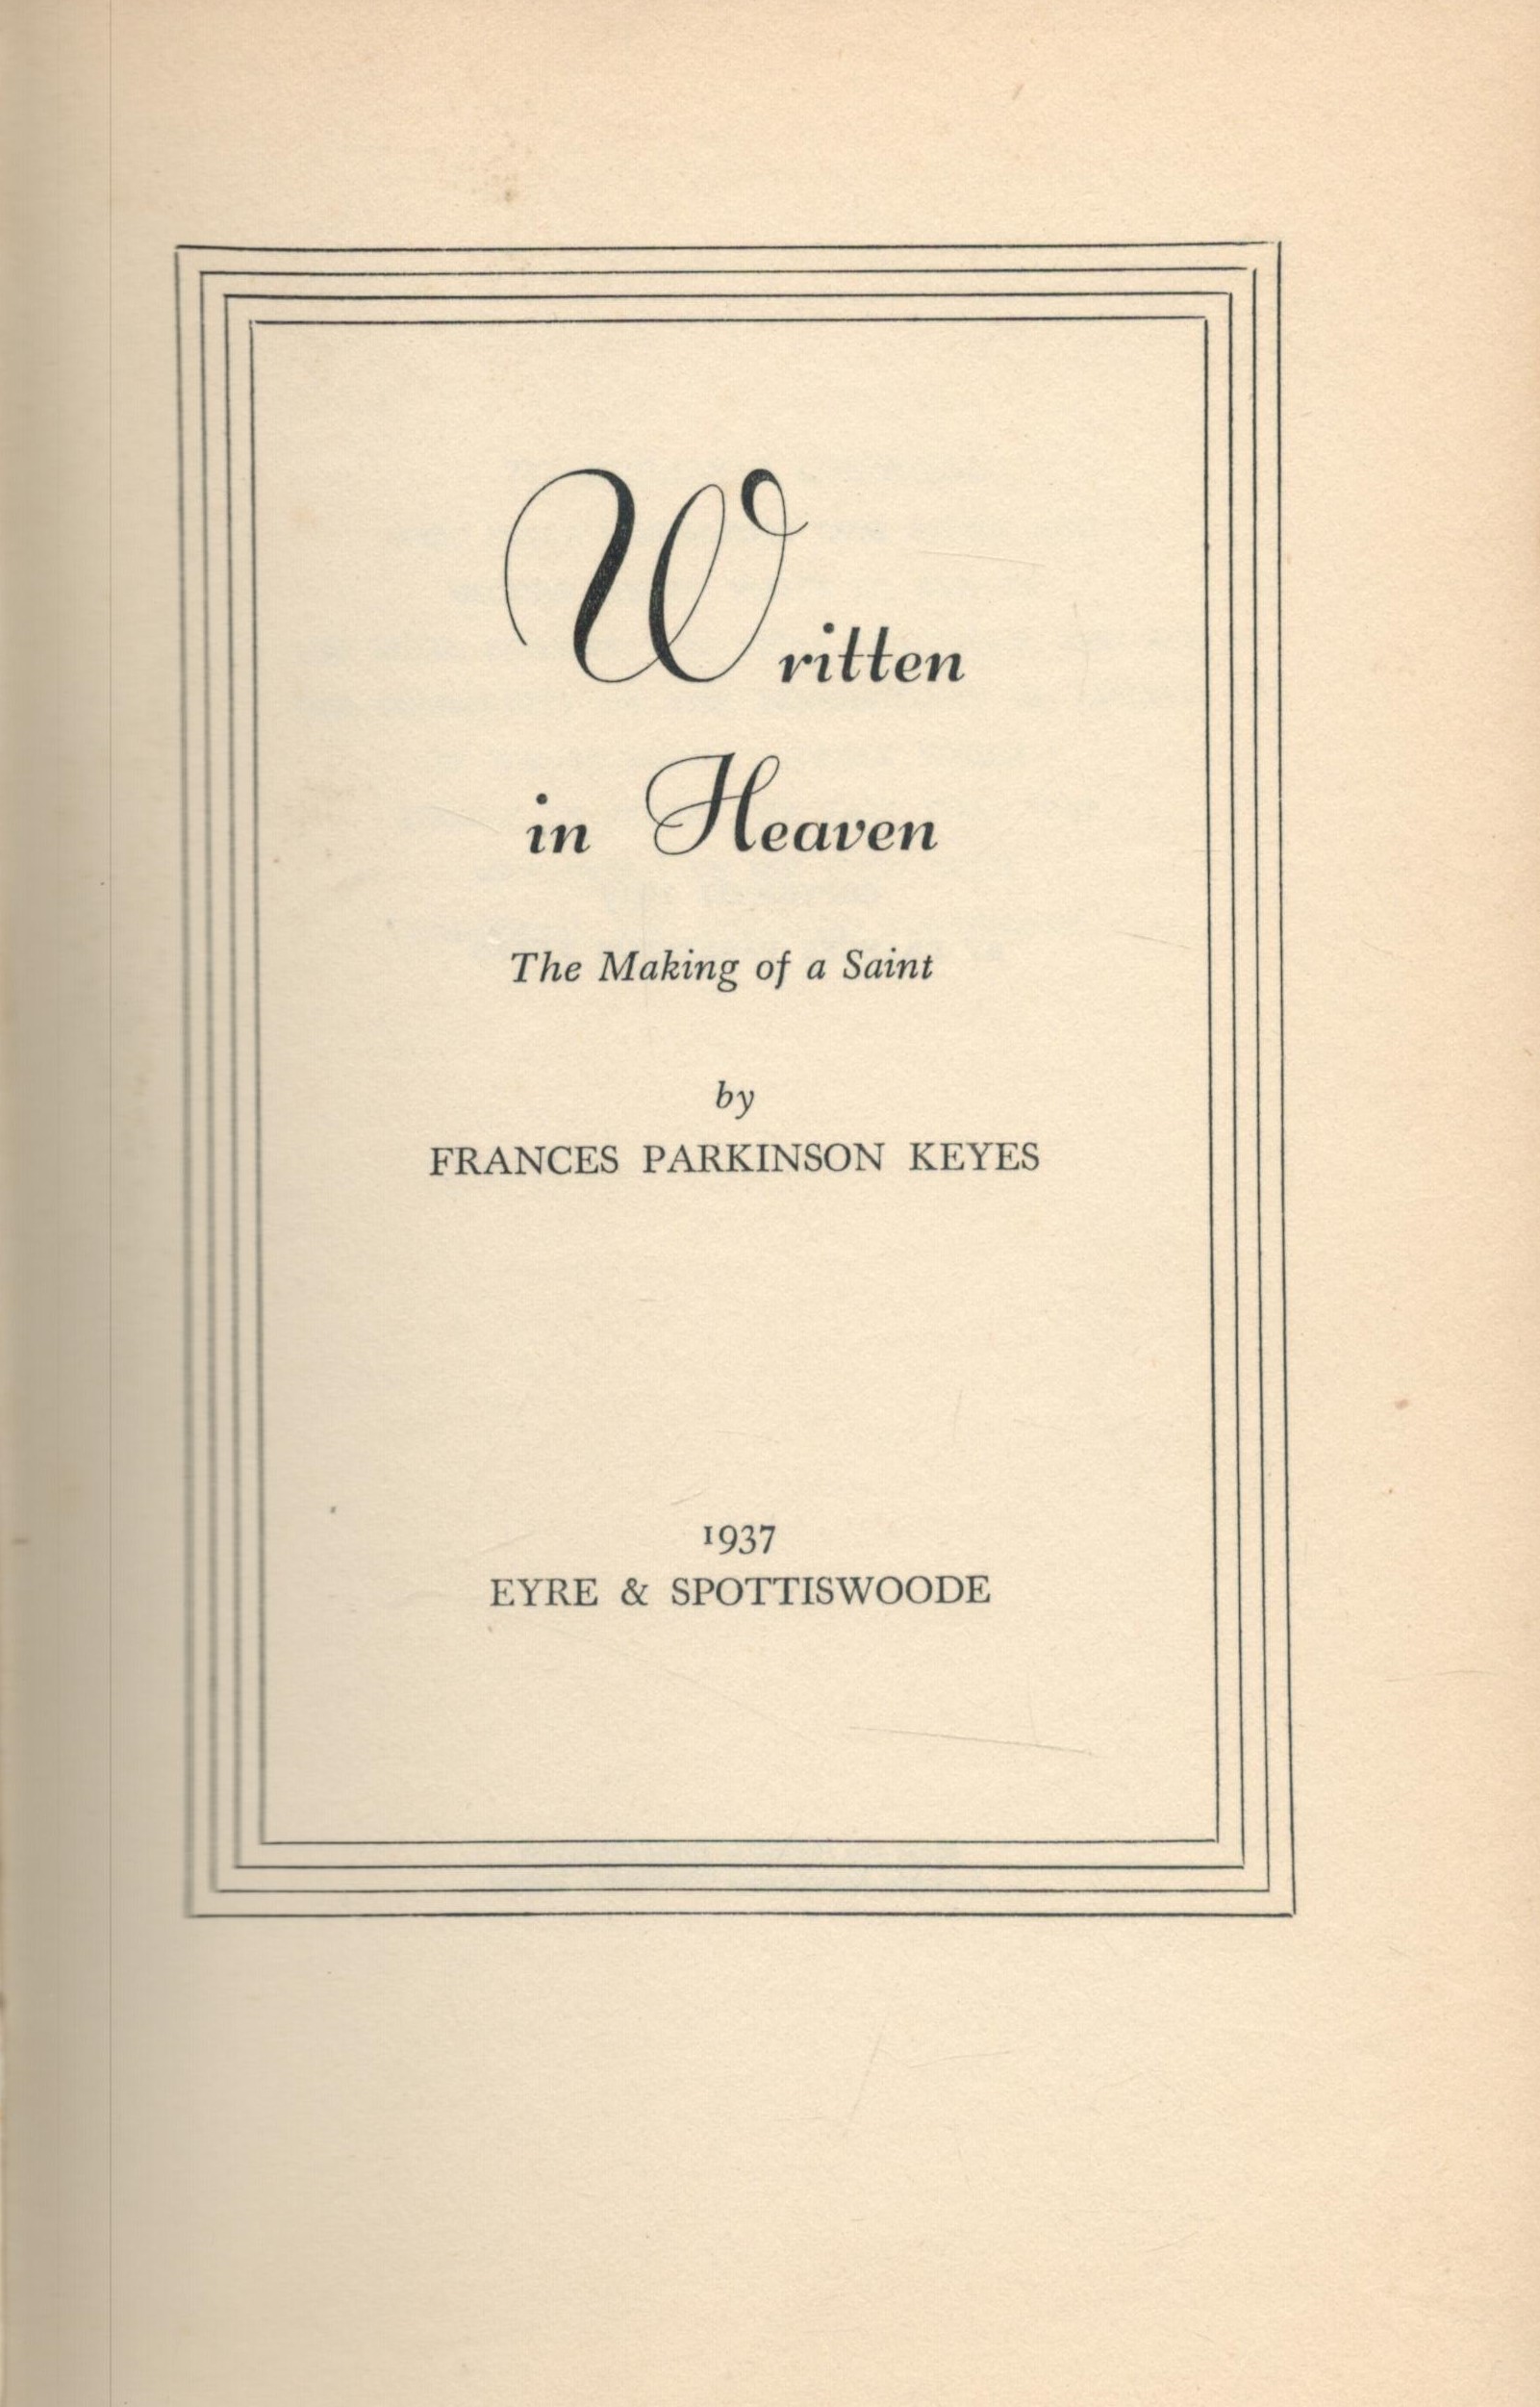 Written in Heaven - The Making of a Saint by Frances Parkinson Keyes 1937 First Edition Hardback - Image 2 of 3